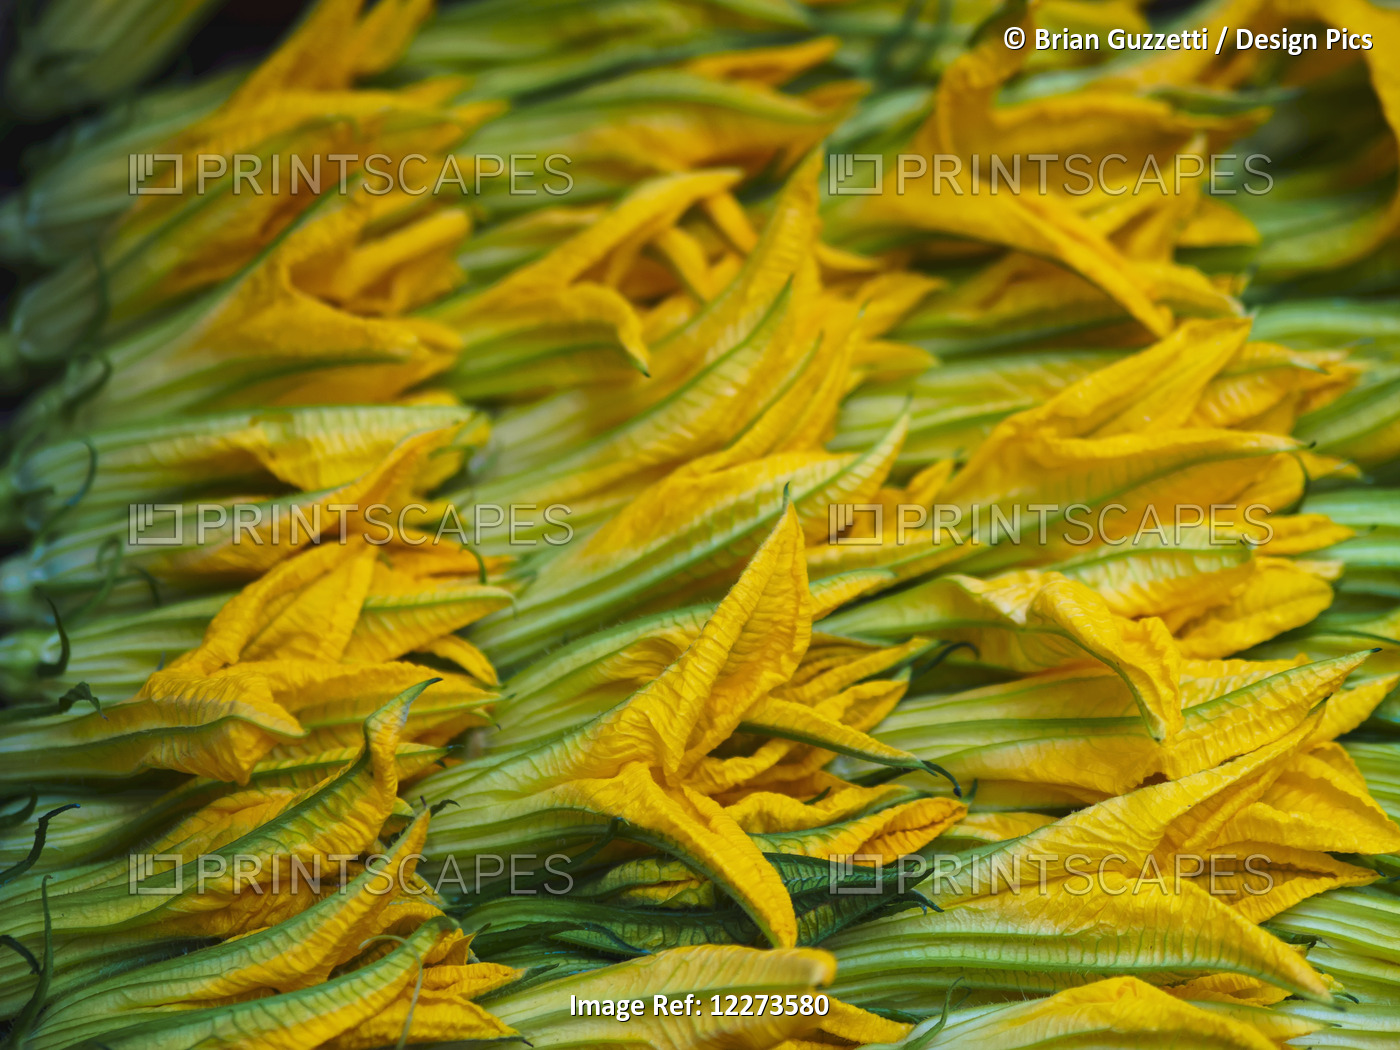 Squash Leaves Are A Treat In Springtime In Italy And Can Be Found For Sale From ...